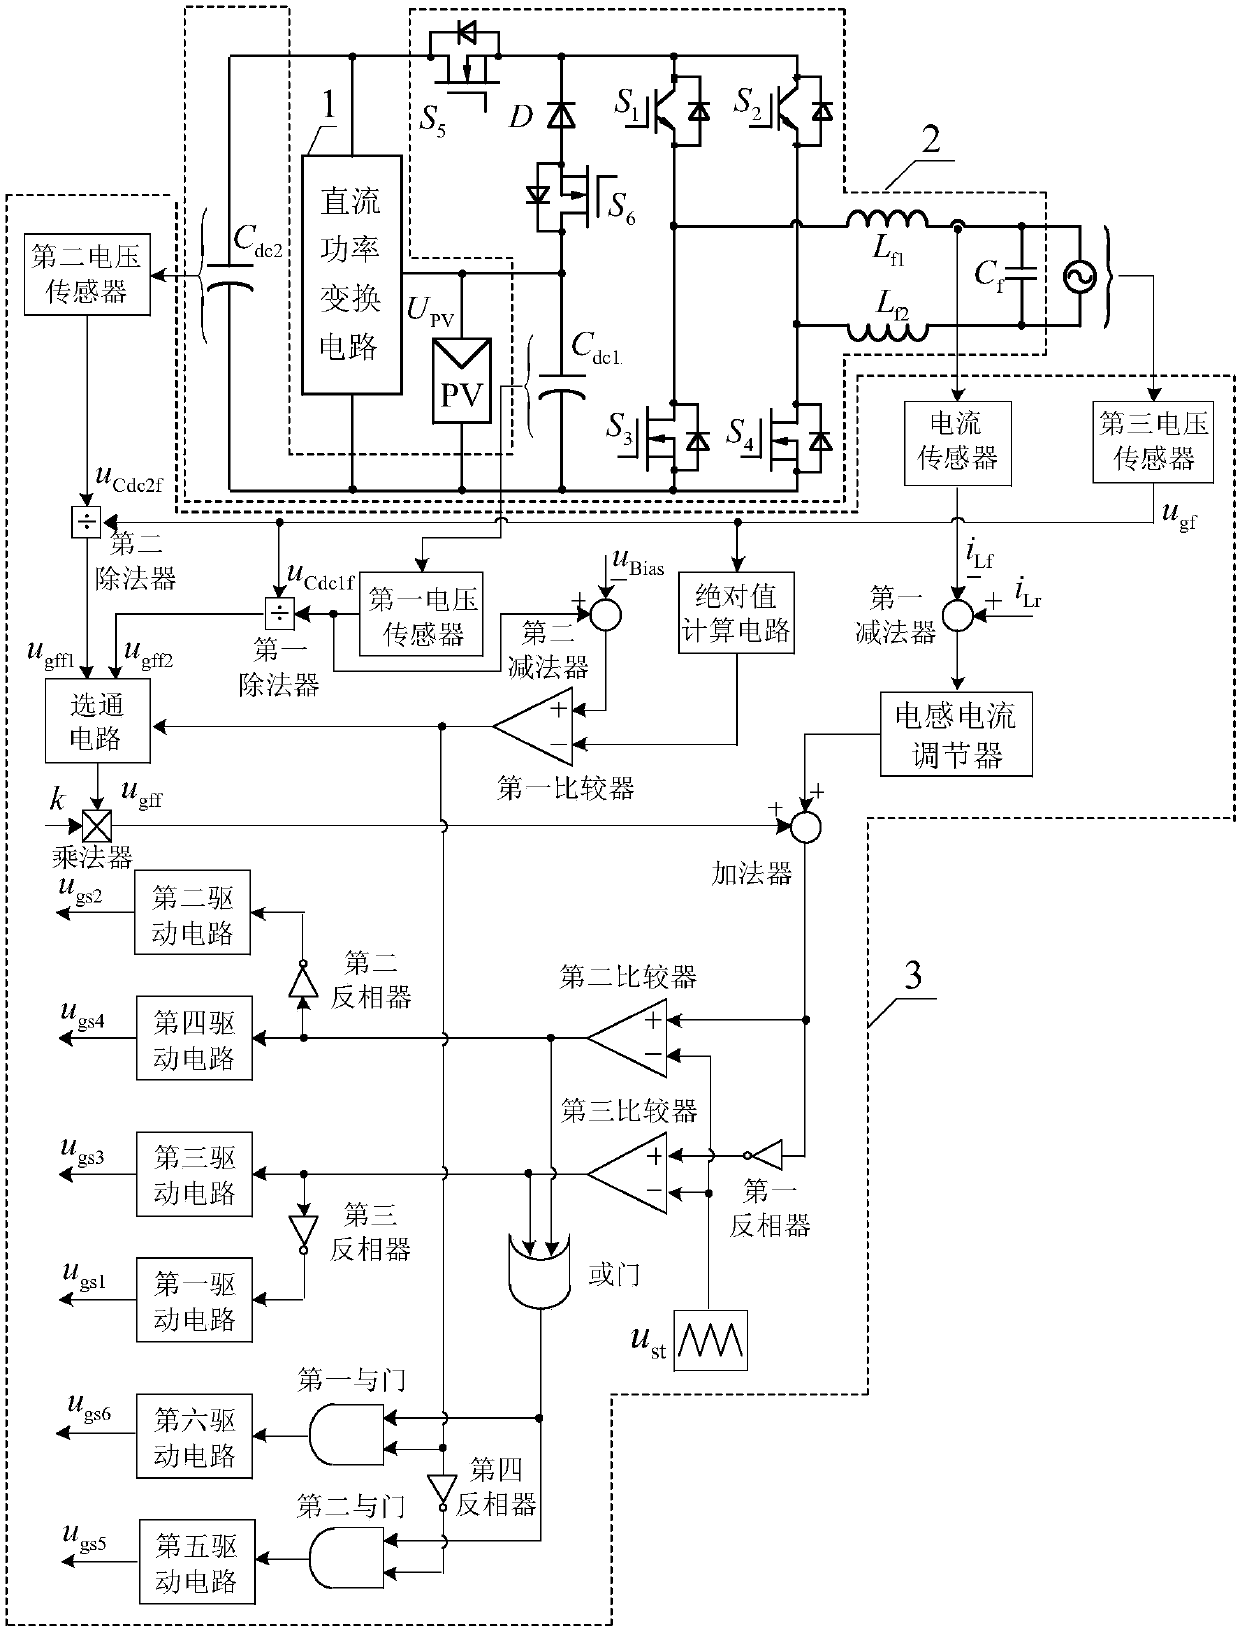 Quasi-single-stage transformerless grid-connected inverter and its control circuit